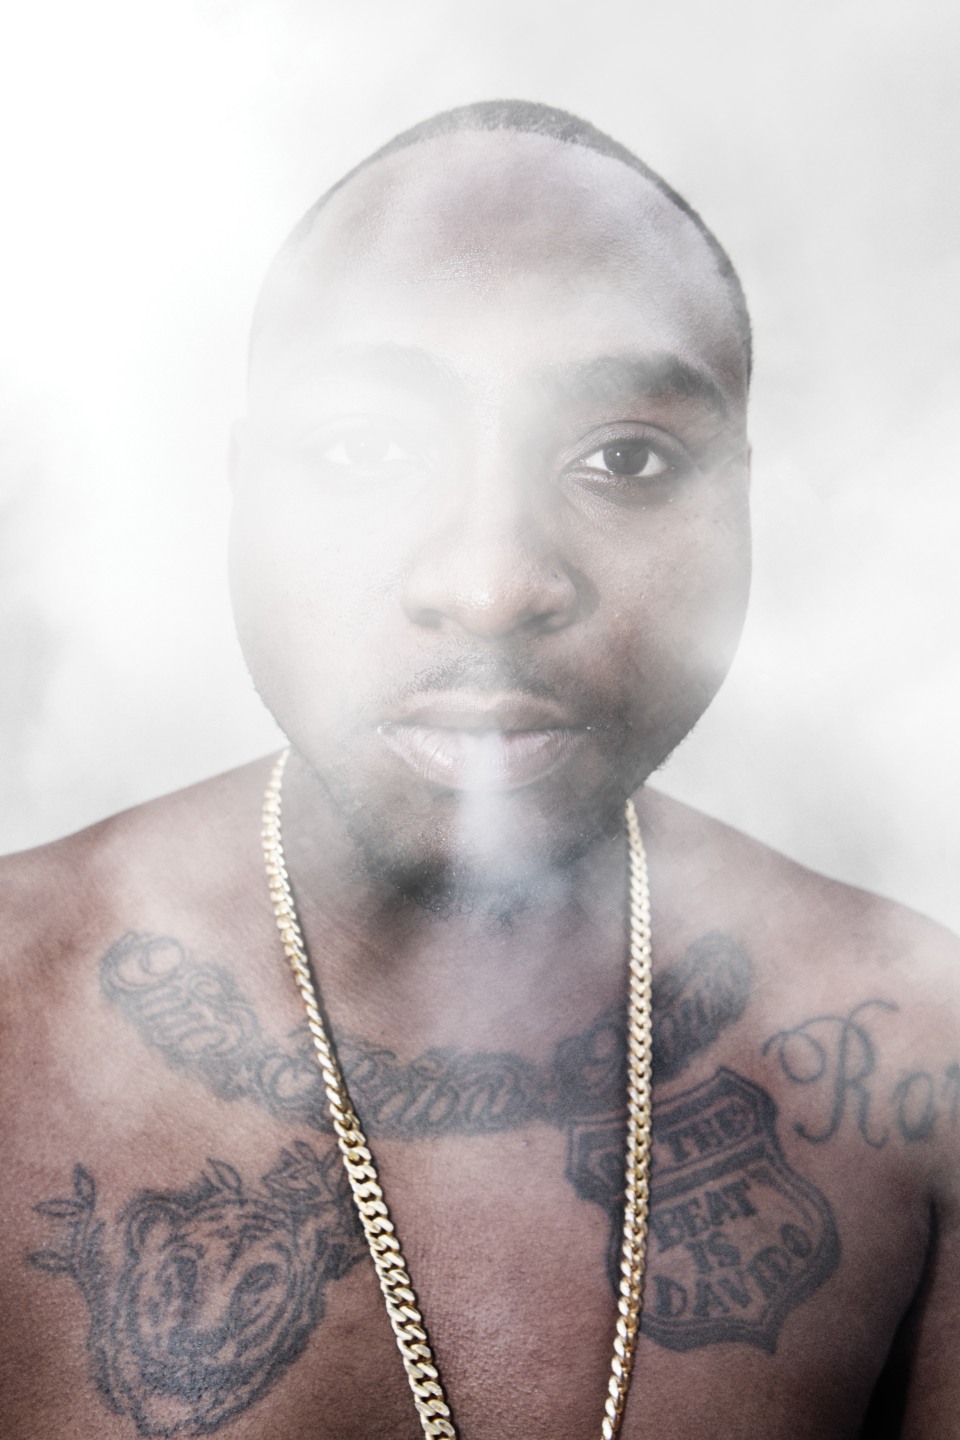 tmp_25950-davido-cover-story-interview1517094298